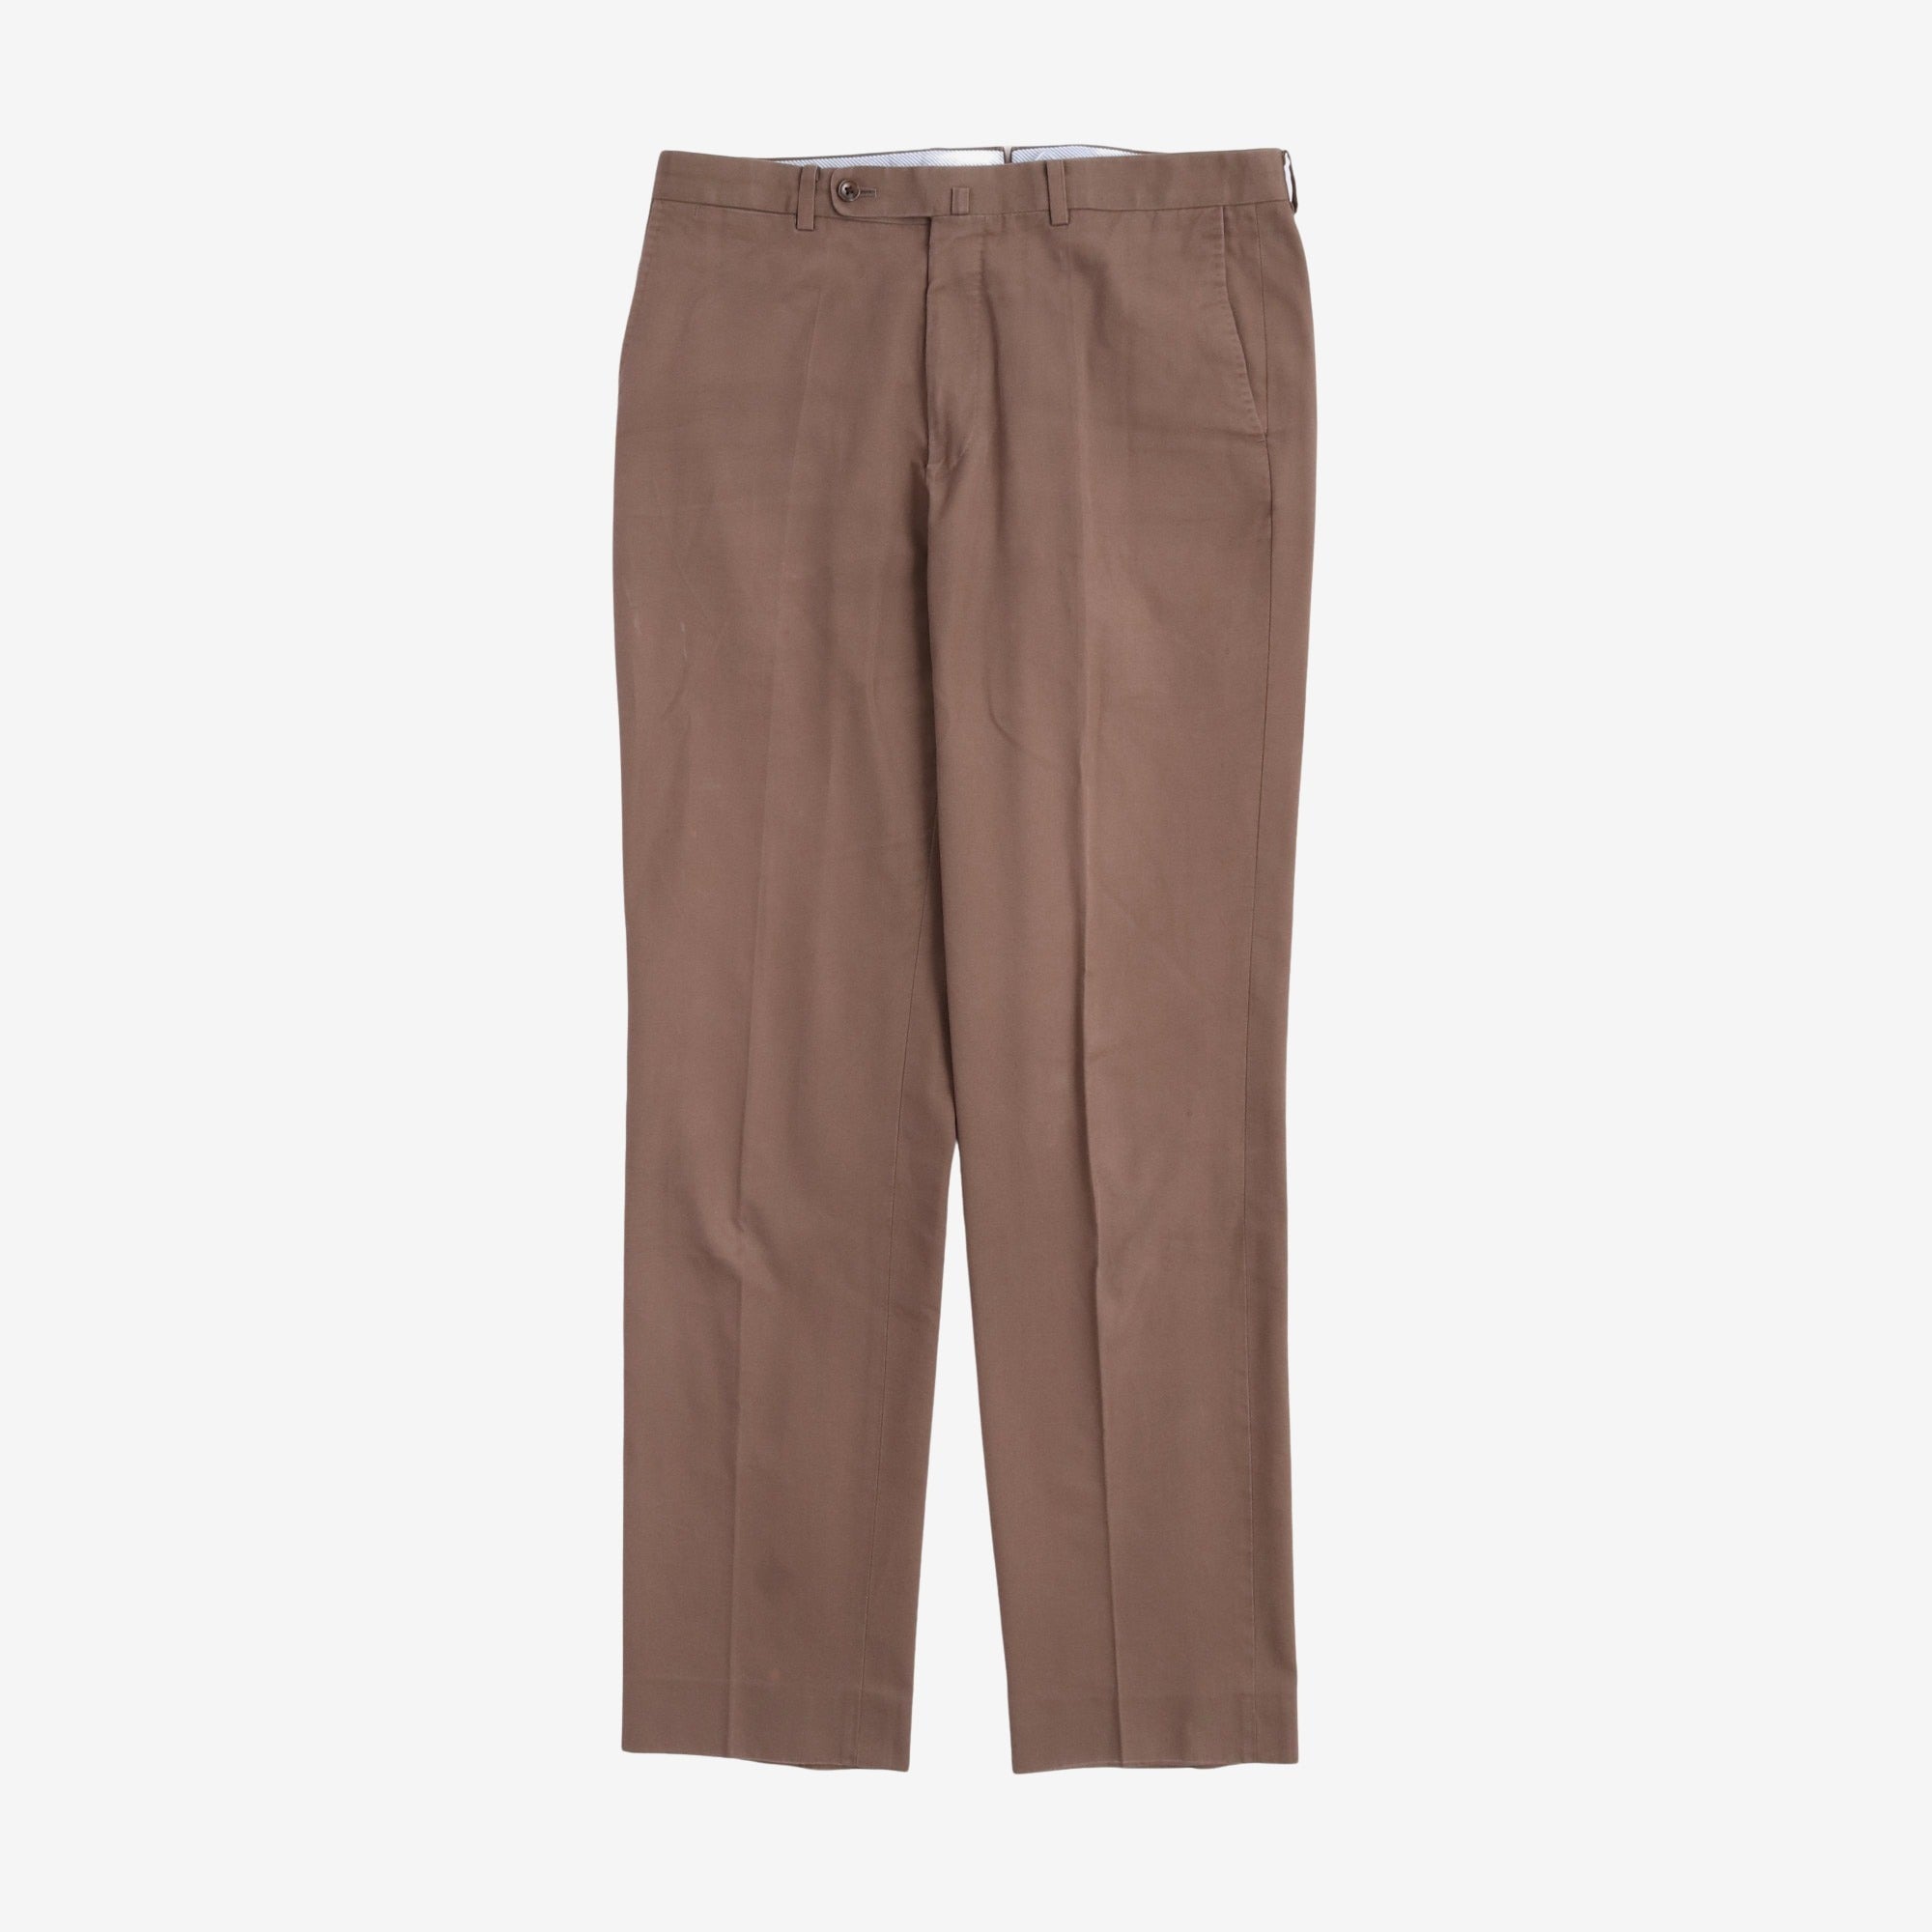 Model A Chinos